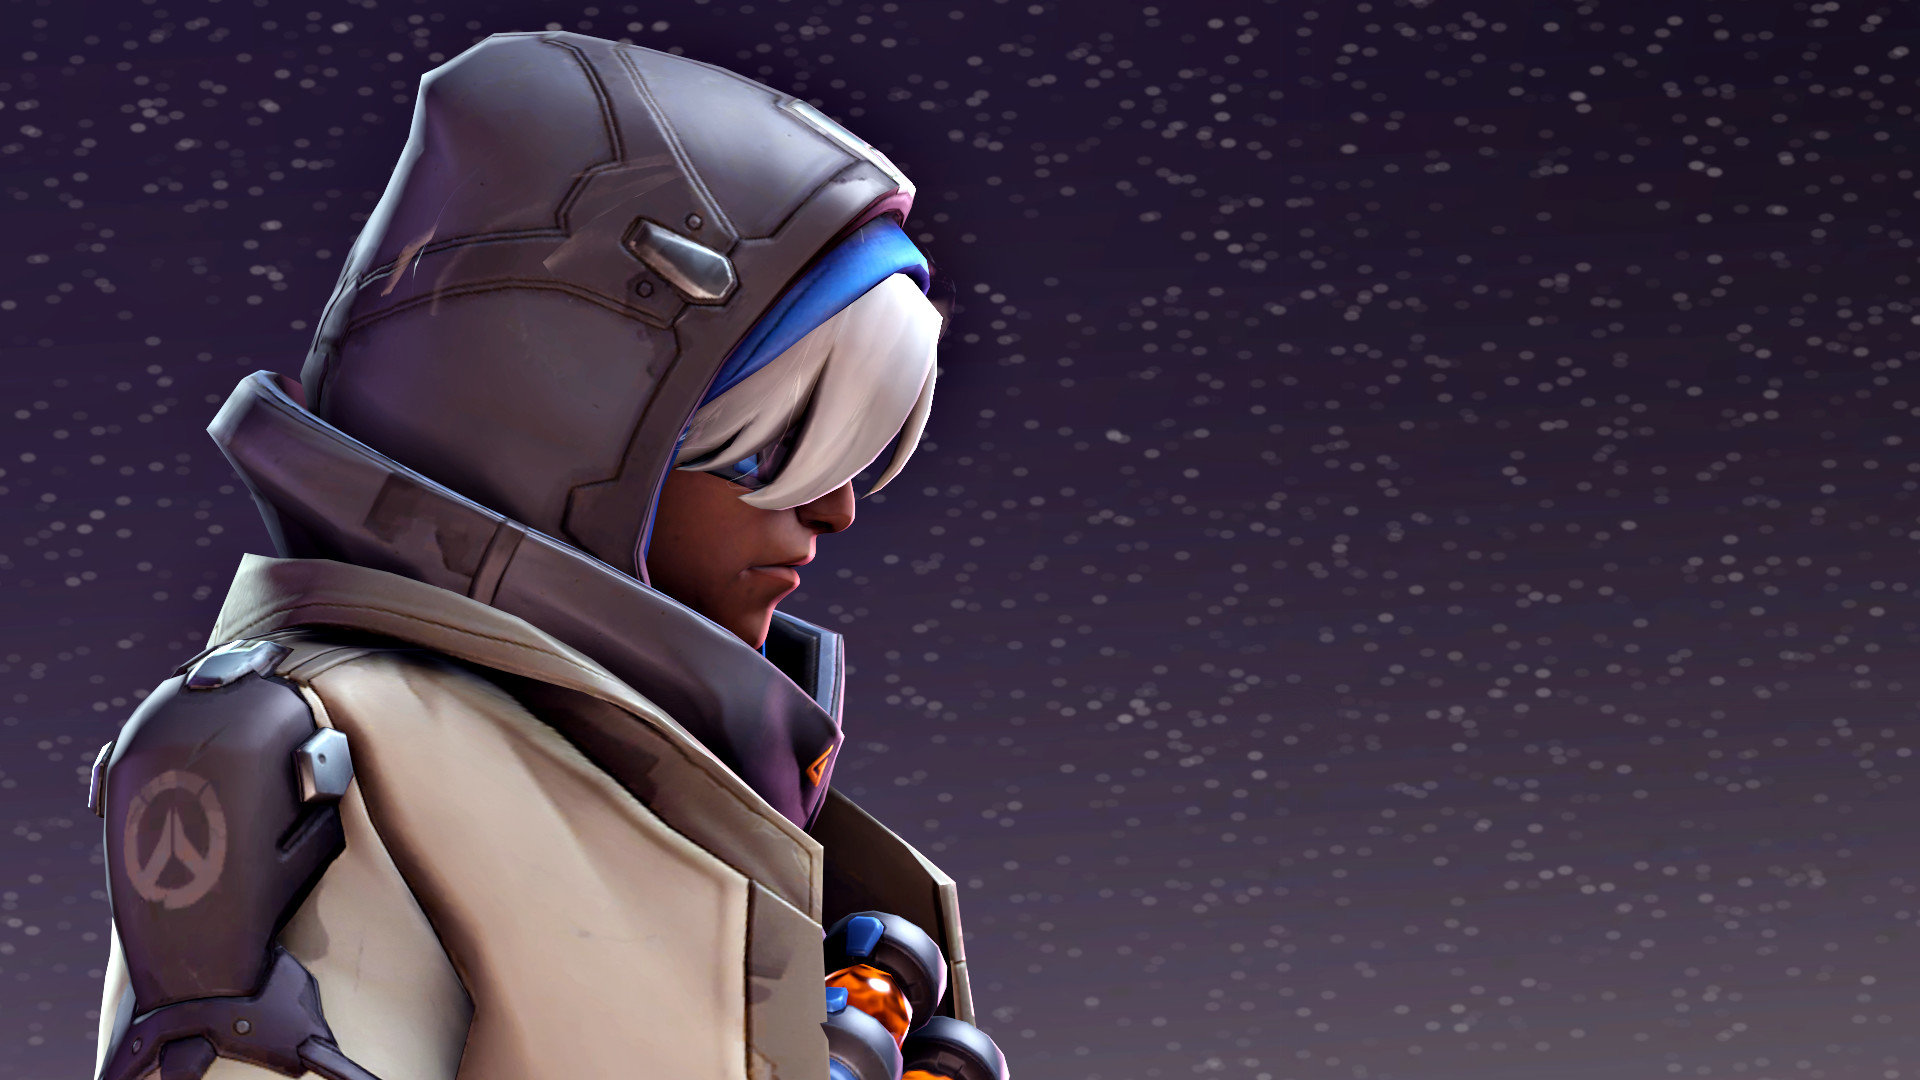 High Resolution Ana Overwatch Full Hd Wallpaper Id 1703 For Pc